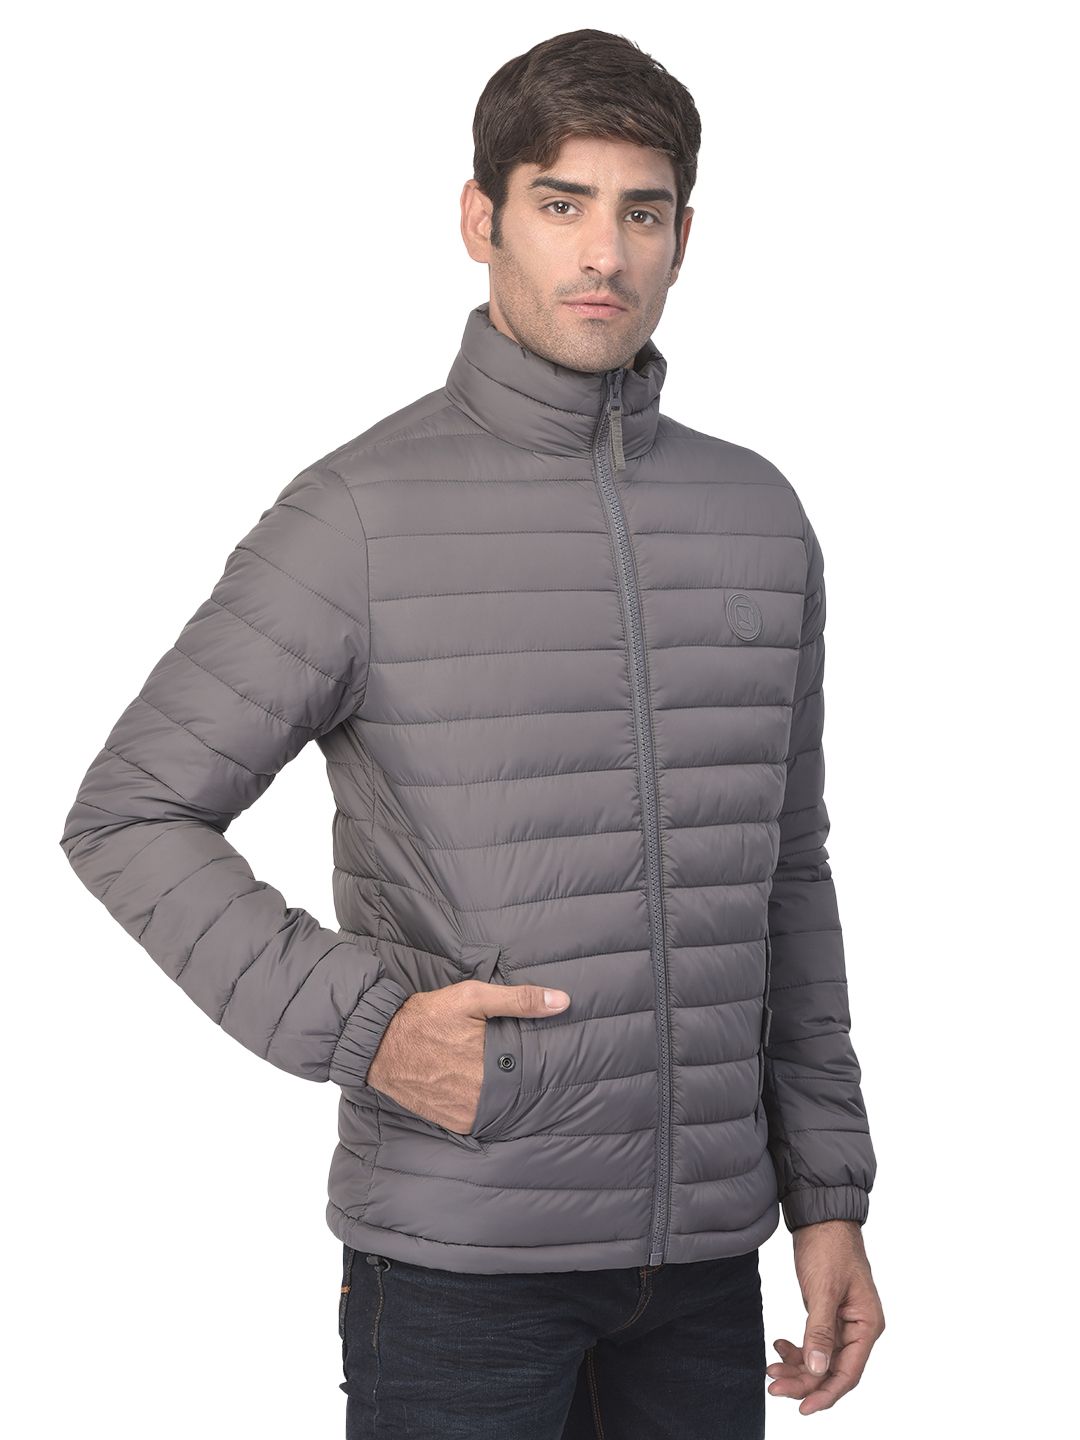 Grey quilted jacket